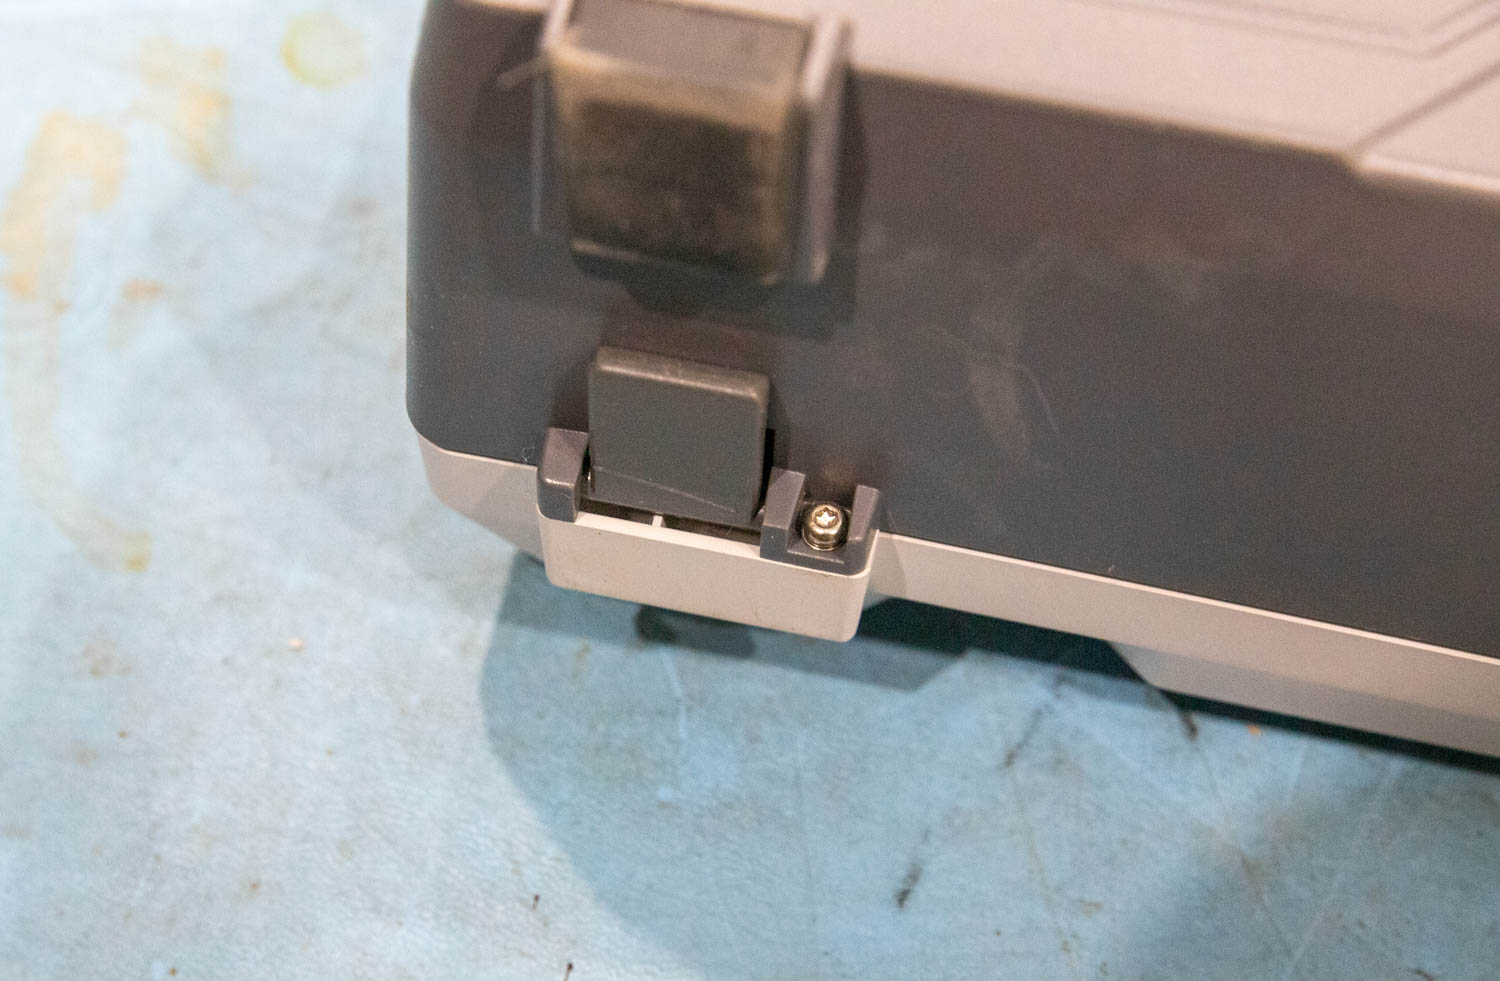 You need to remove four Torx screws from the back of the Rigol DSA815-TG to remove the rear panel